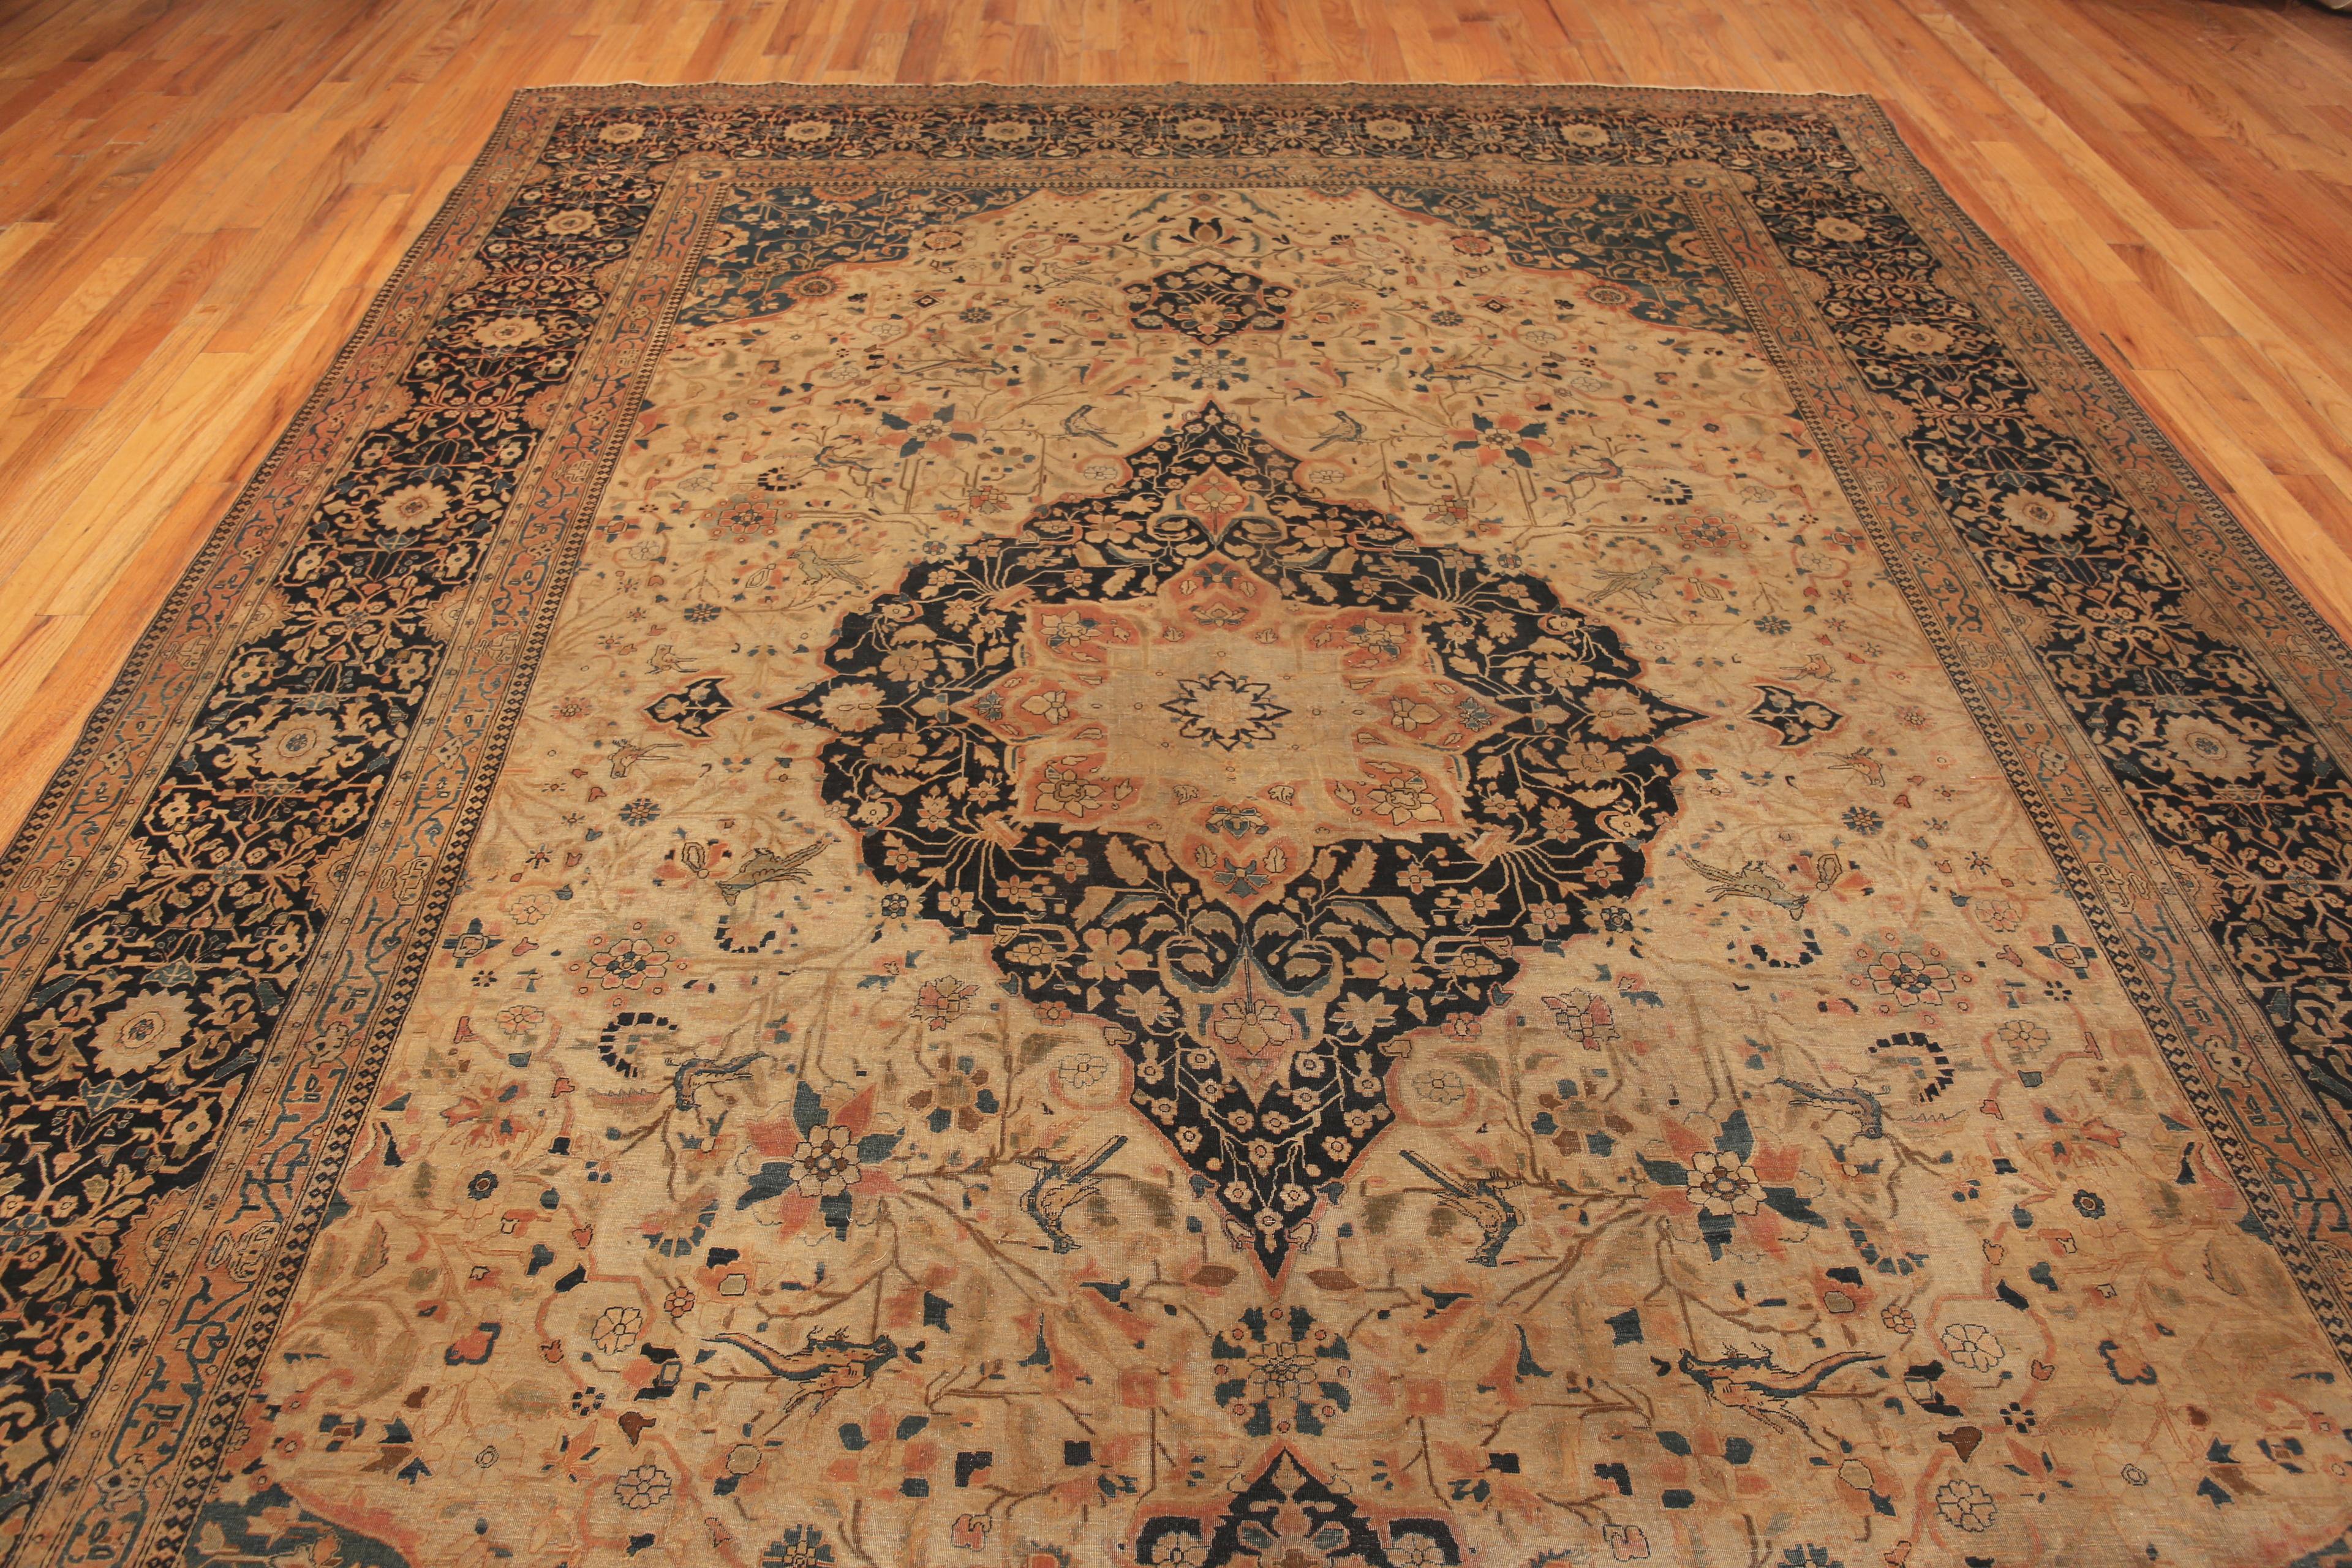 Antique Persian Mohtasham Kashan Rug, Country of origin: Persia, Circa date: 1880. Size: 9 ft 10 in x 13 ft 7 in (3 m x 4.14 m)

